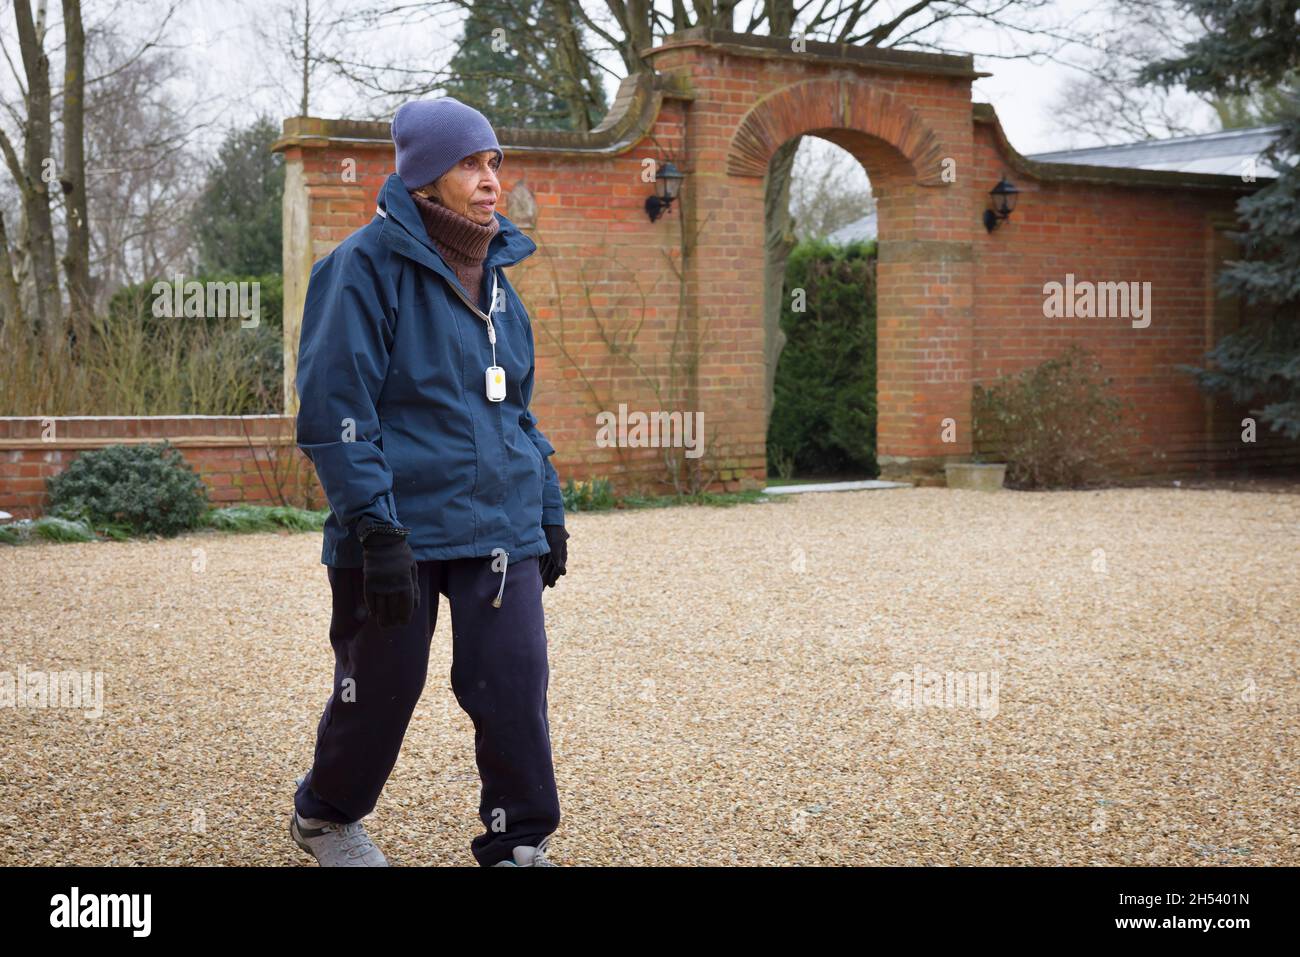 Elderly Asian Indian woman exercising, walking outdoors in winter, UK. Wearing warm clothing and an SOS personal safety alarm pendant Stock Photo